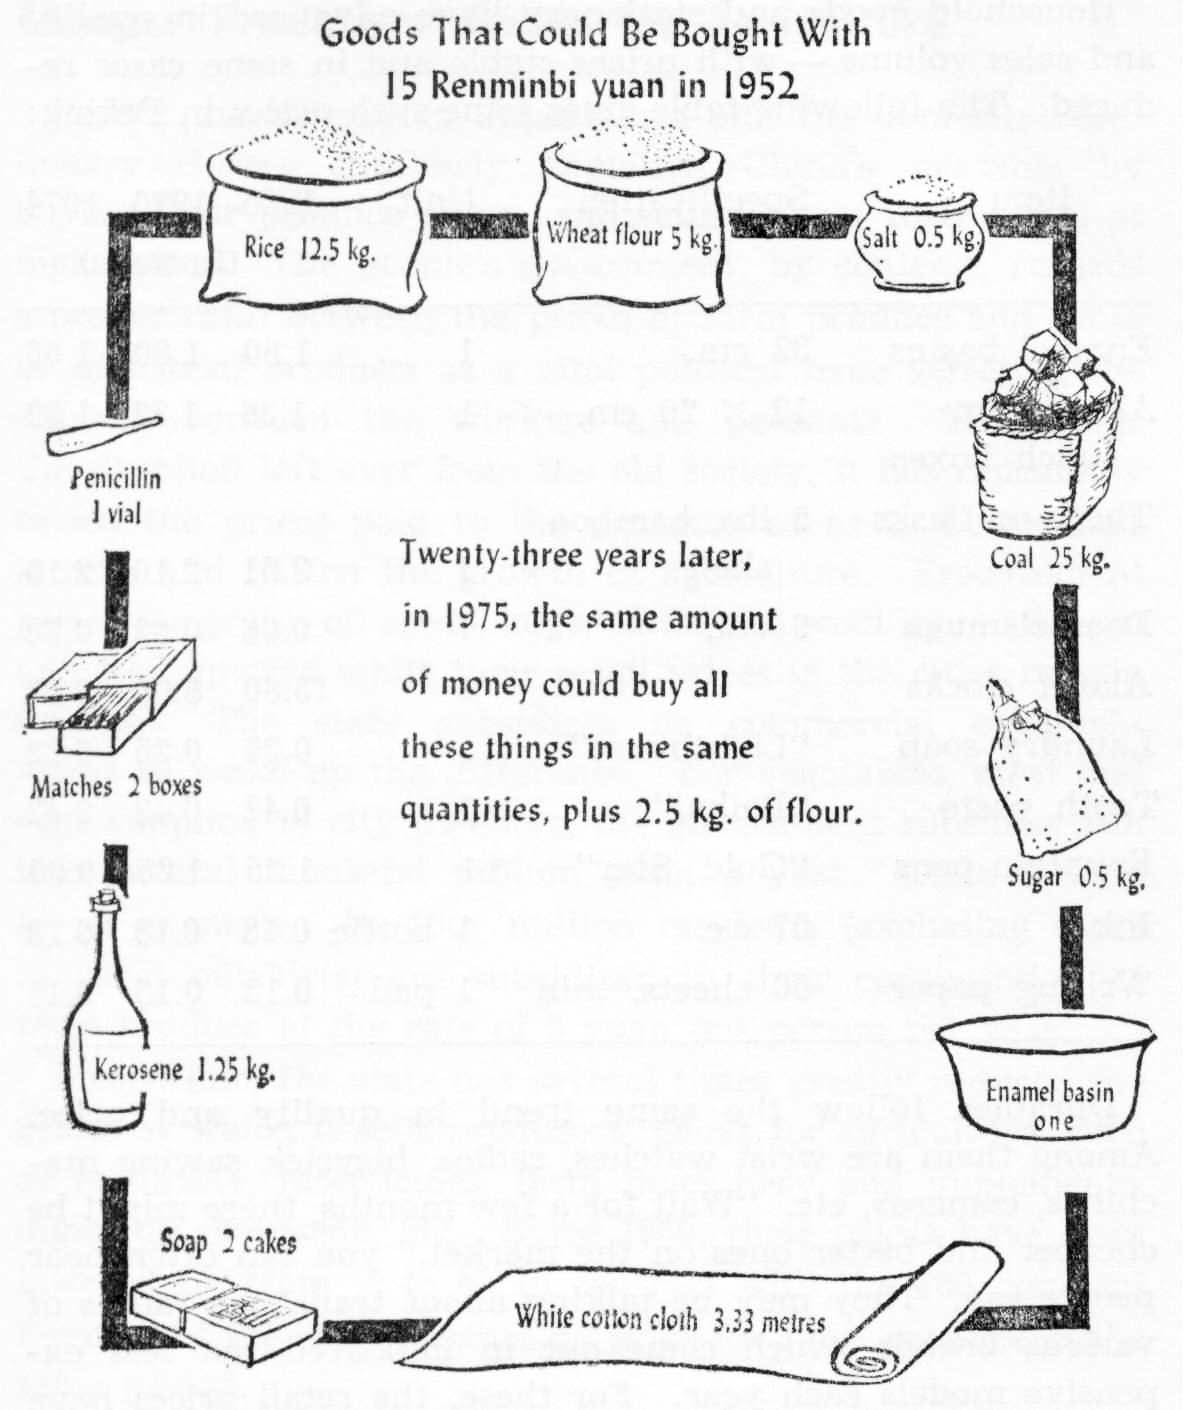 Goods That Could Be Bought With 15 Renminbi yuan in 1952.jpg